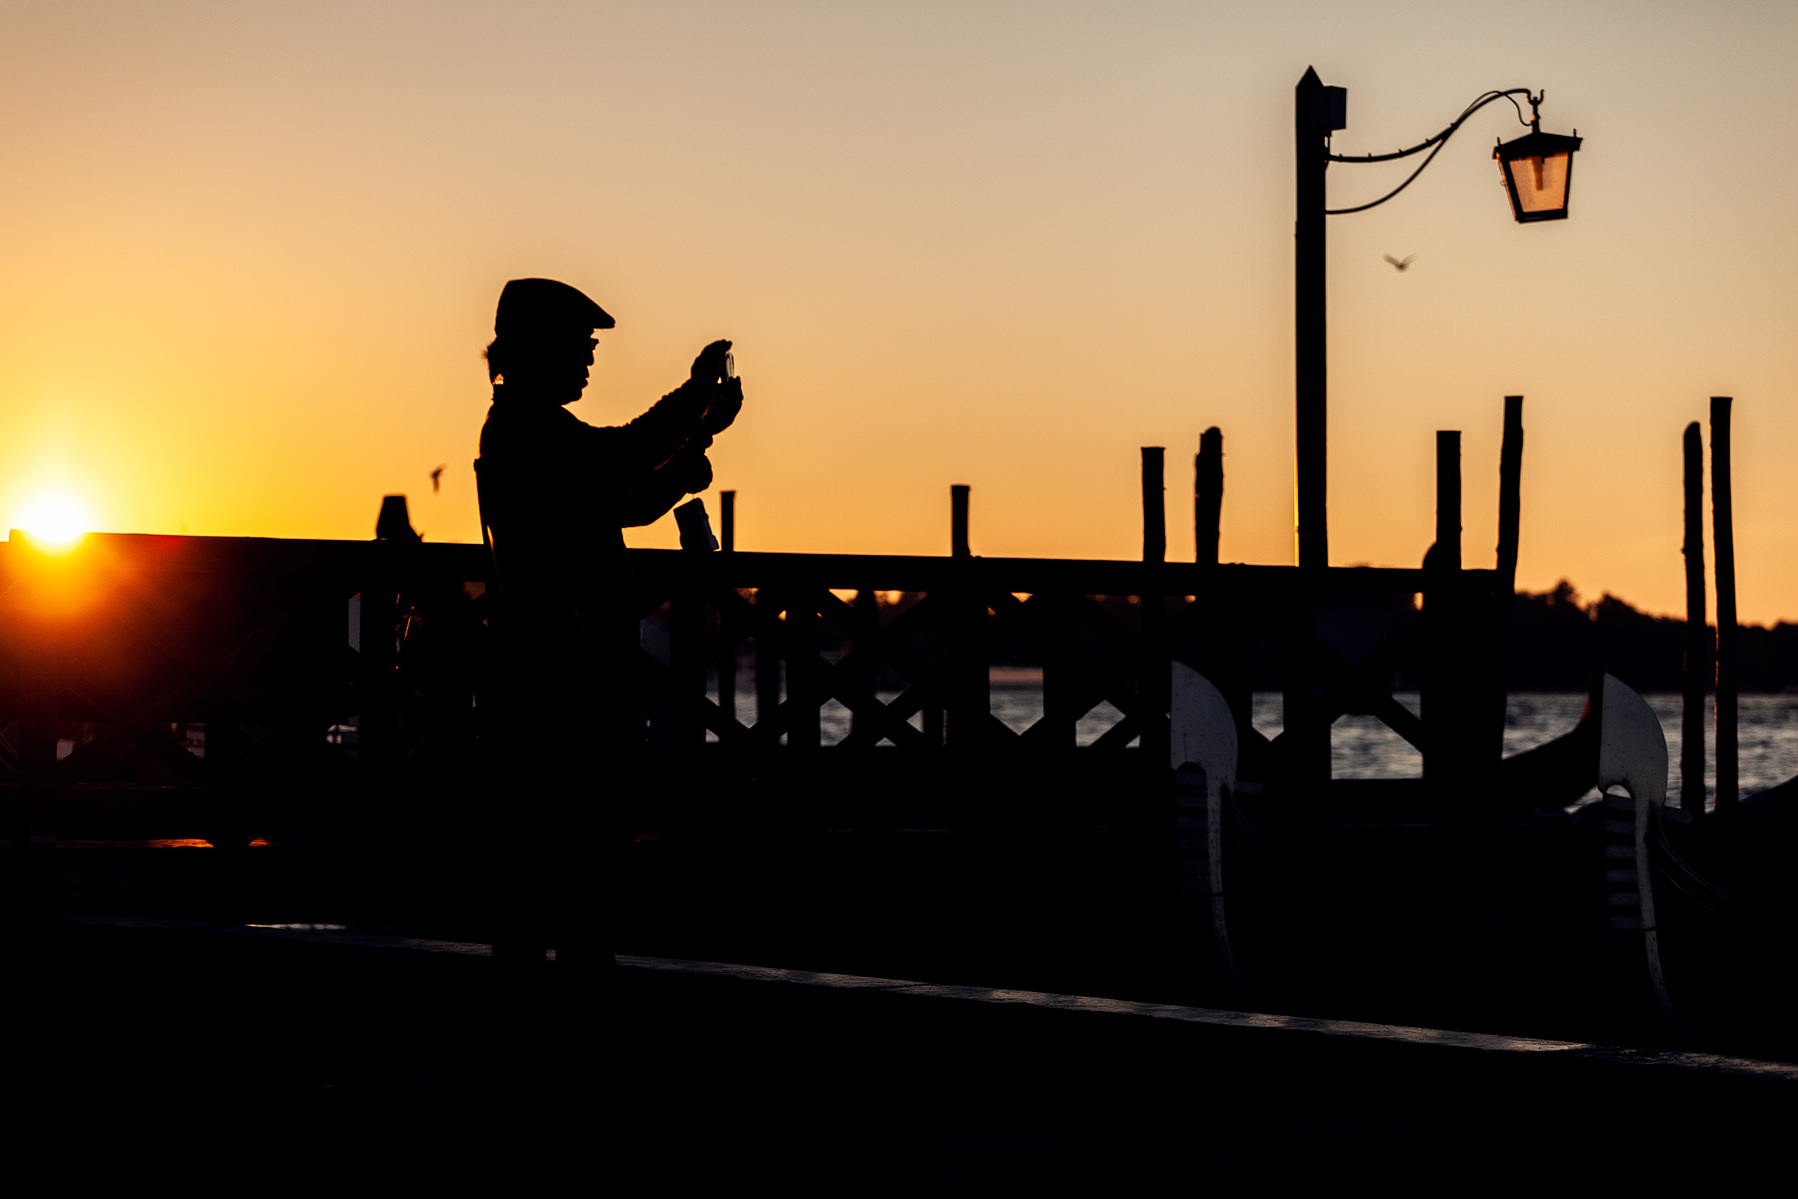 A man takes a photo during sunset in Venice, Italy.